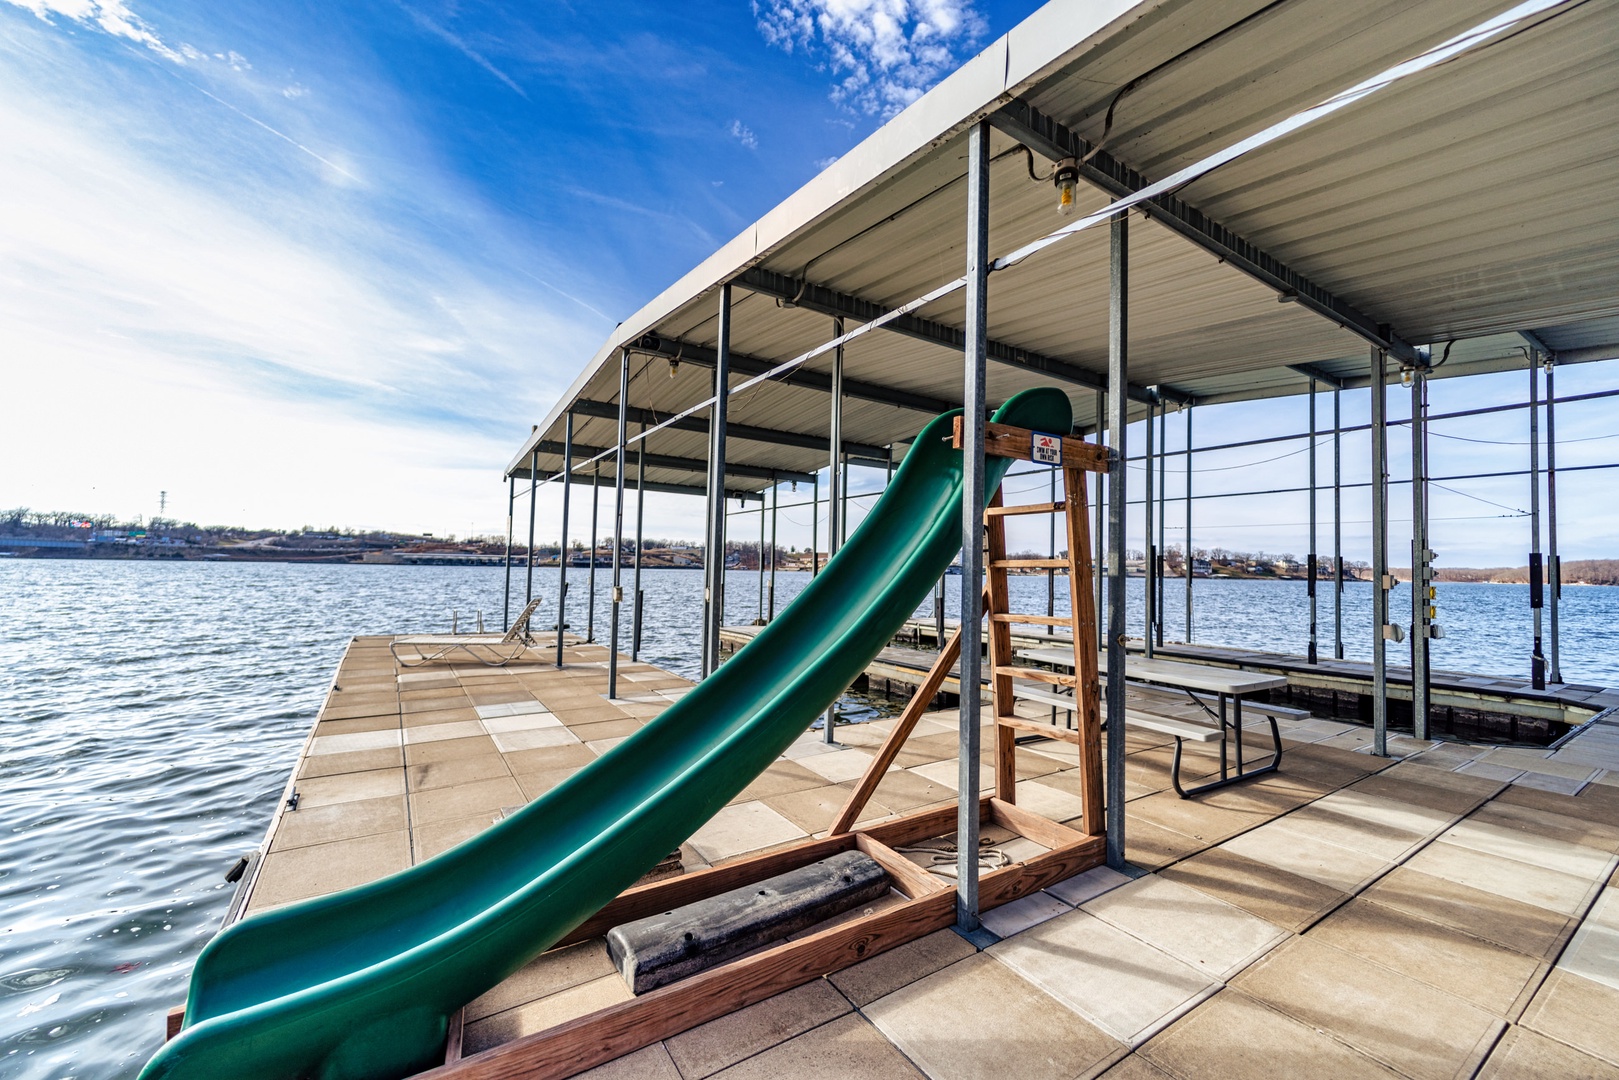 Spacious boat dock with slide